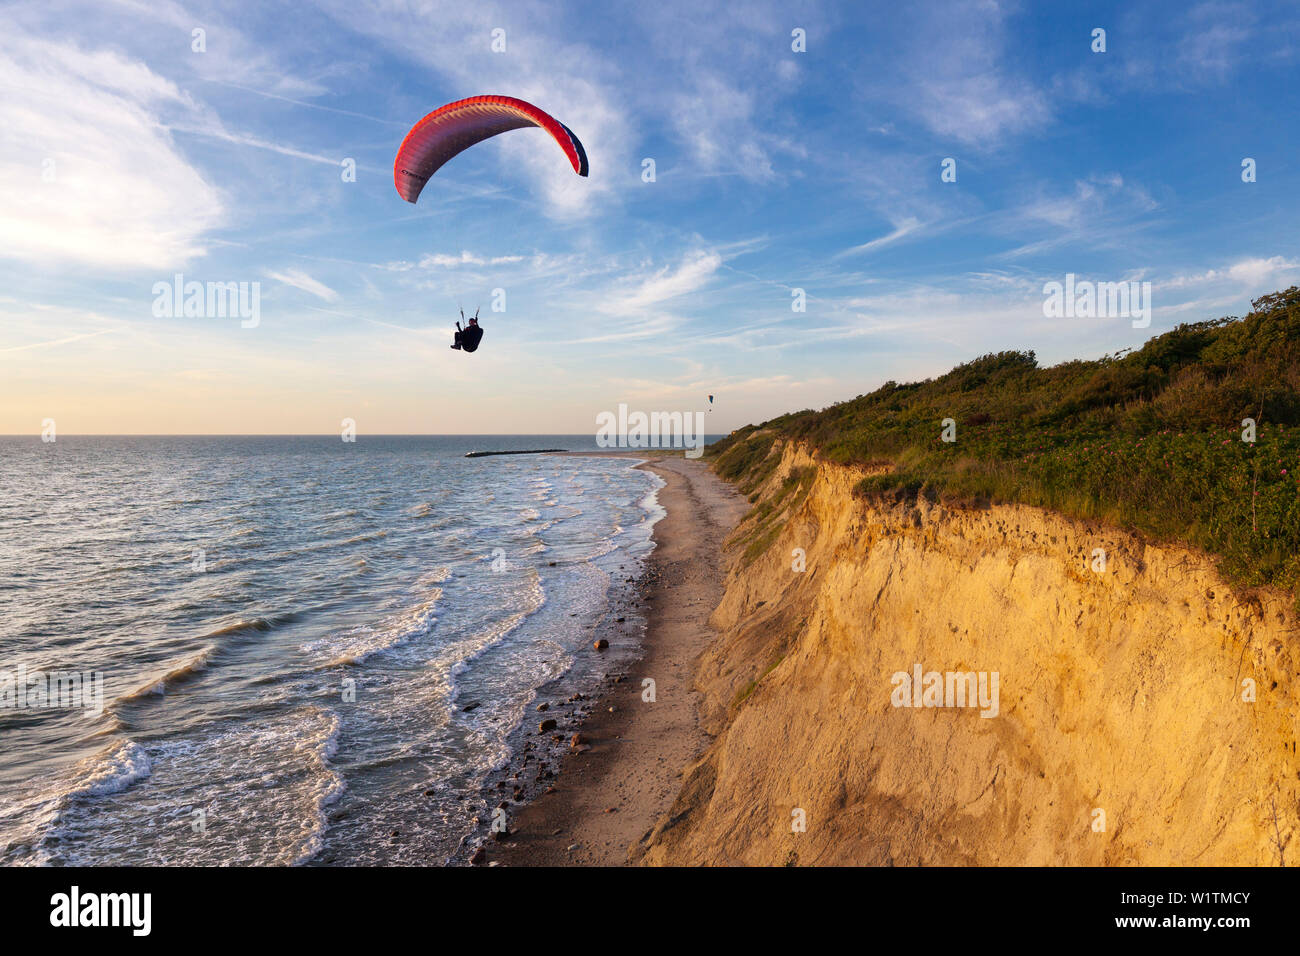 Paraglider at Hohes Ufer near Ahrenshoop, Baltic Sea, Mecklenburg-West Pomerania, Germany Stock Photo